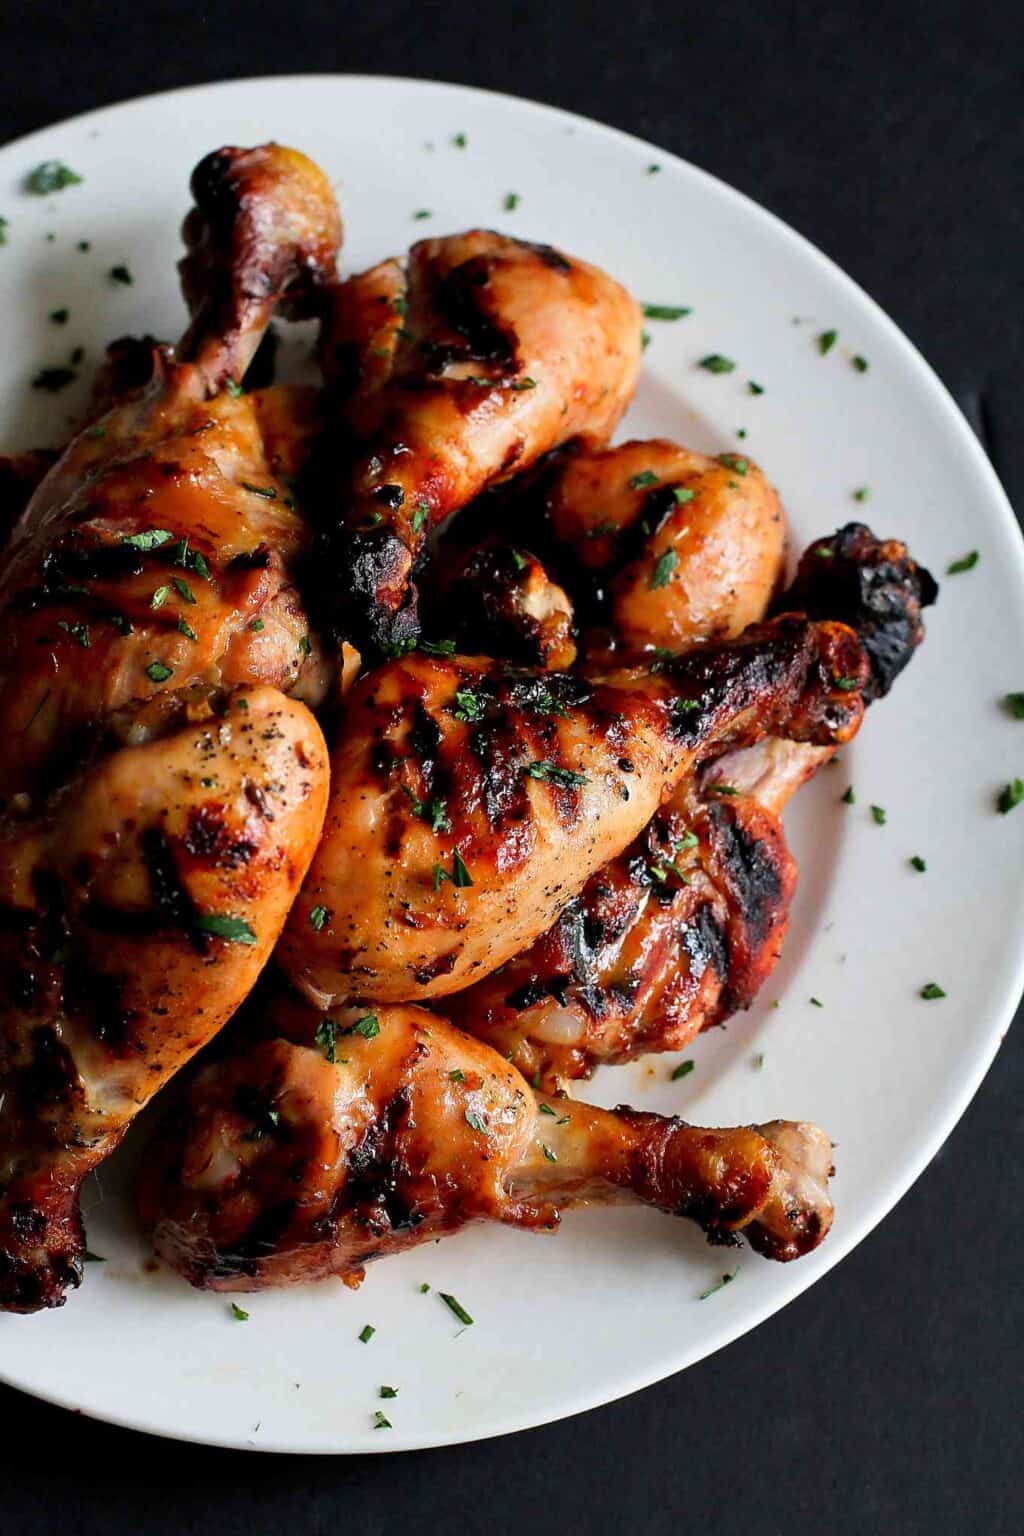 Grilled chicken drumsticks, sprinkled with parsley on a white plate.